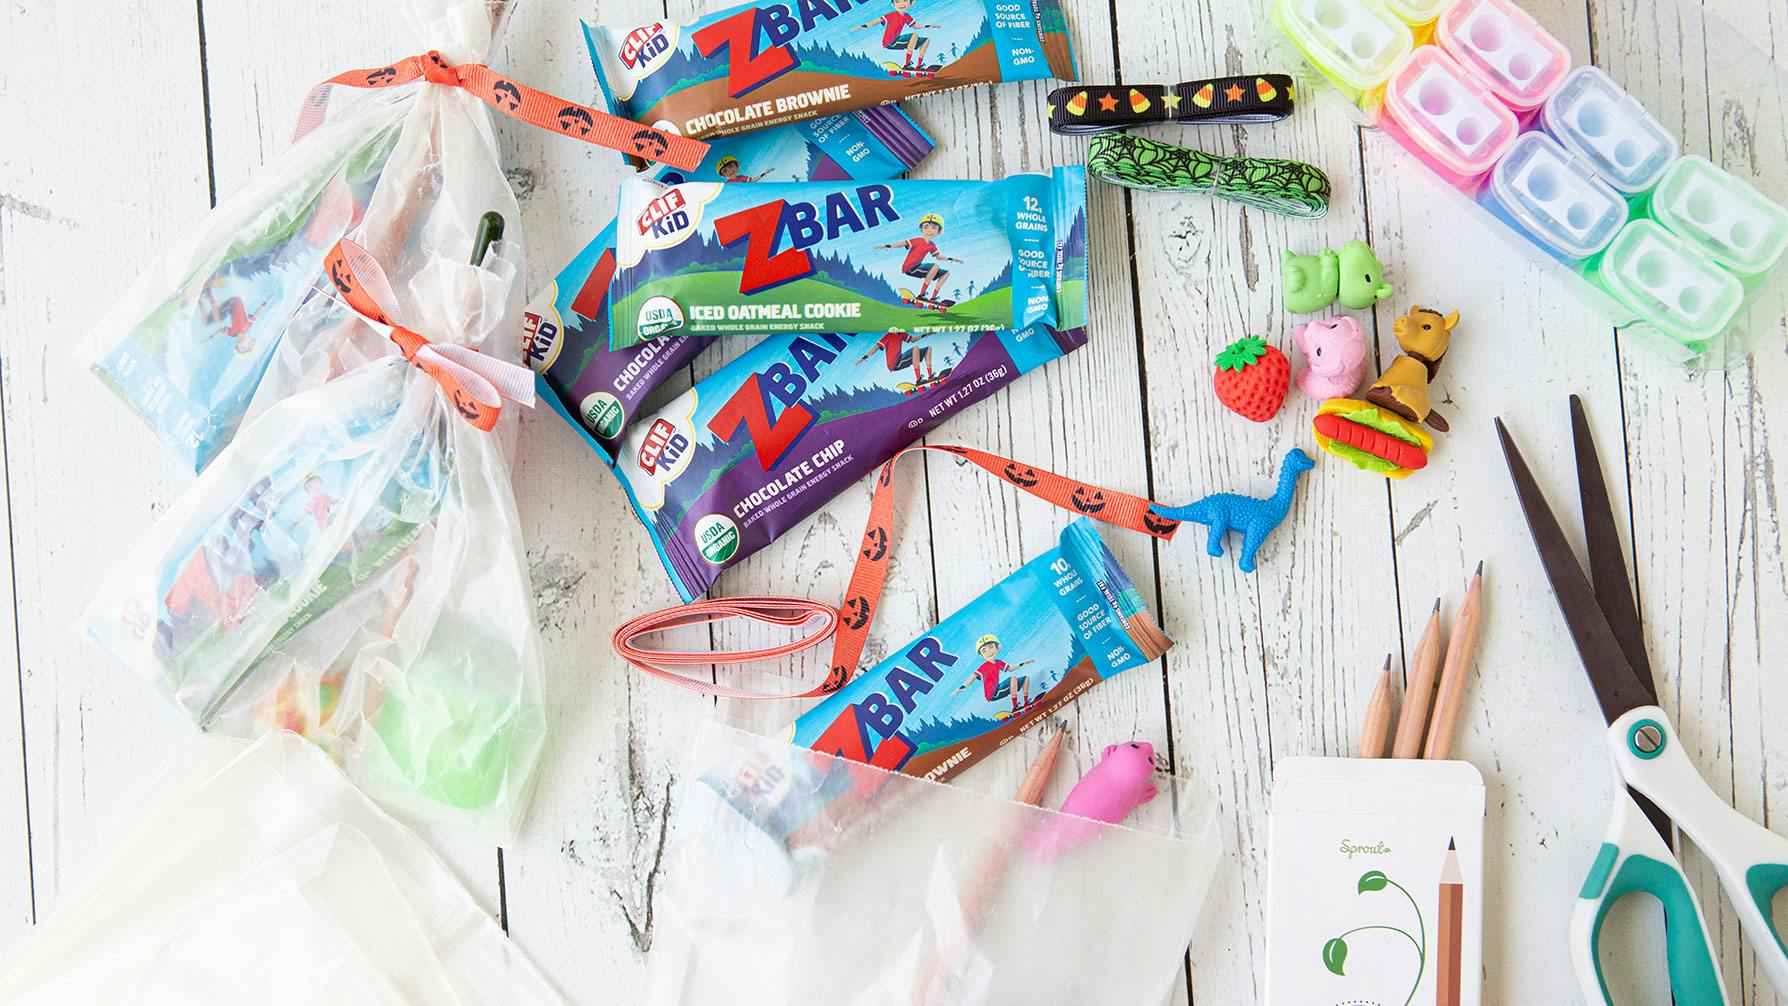 Creating Halloween goodie bags with Zbars and erasers